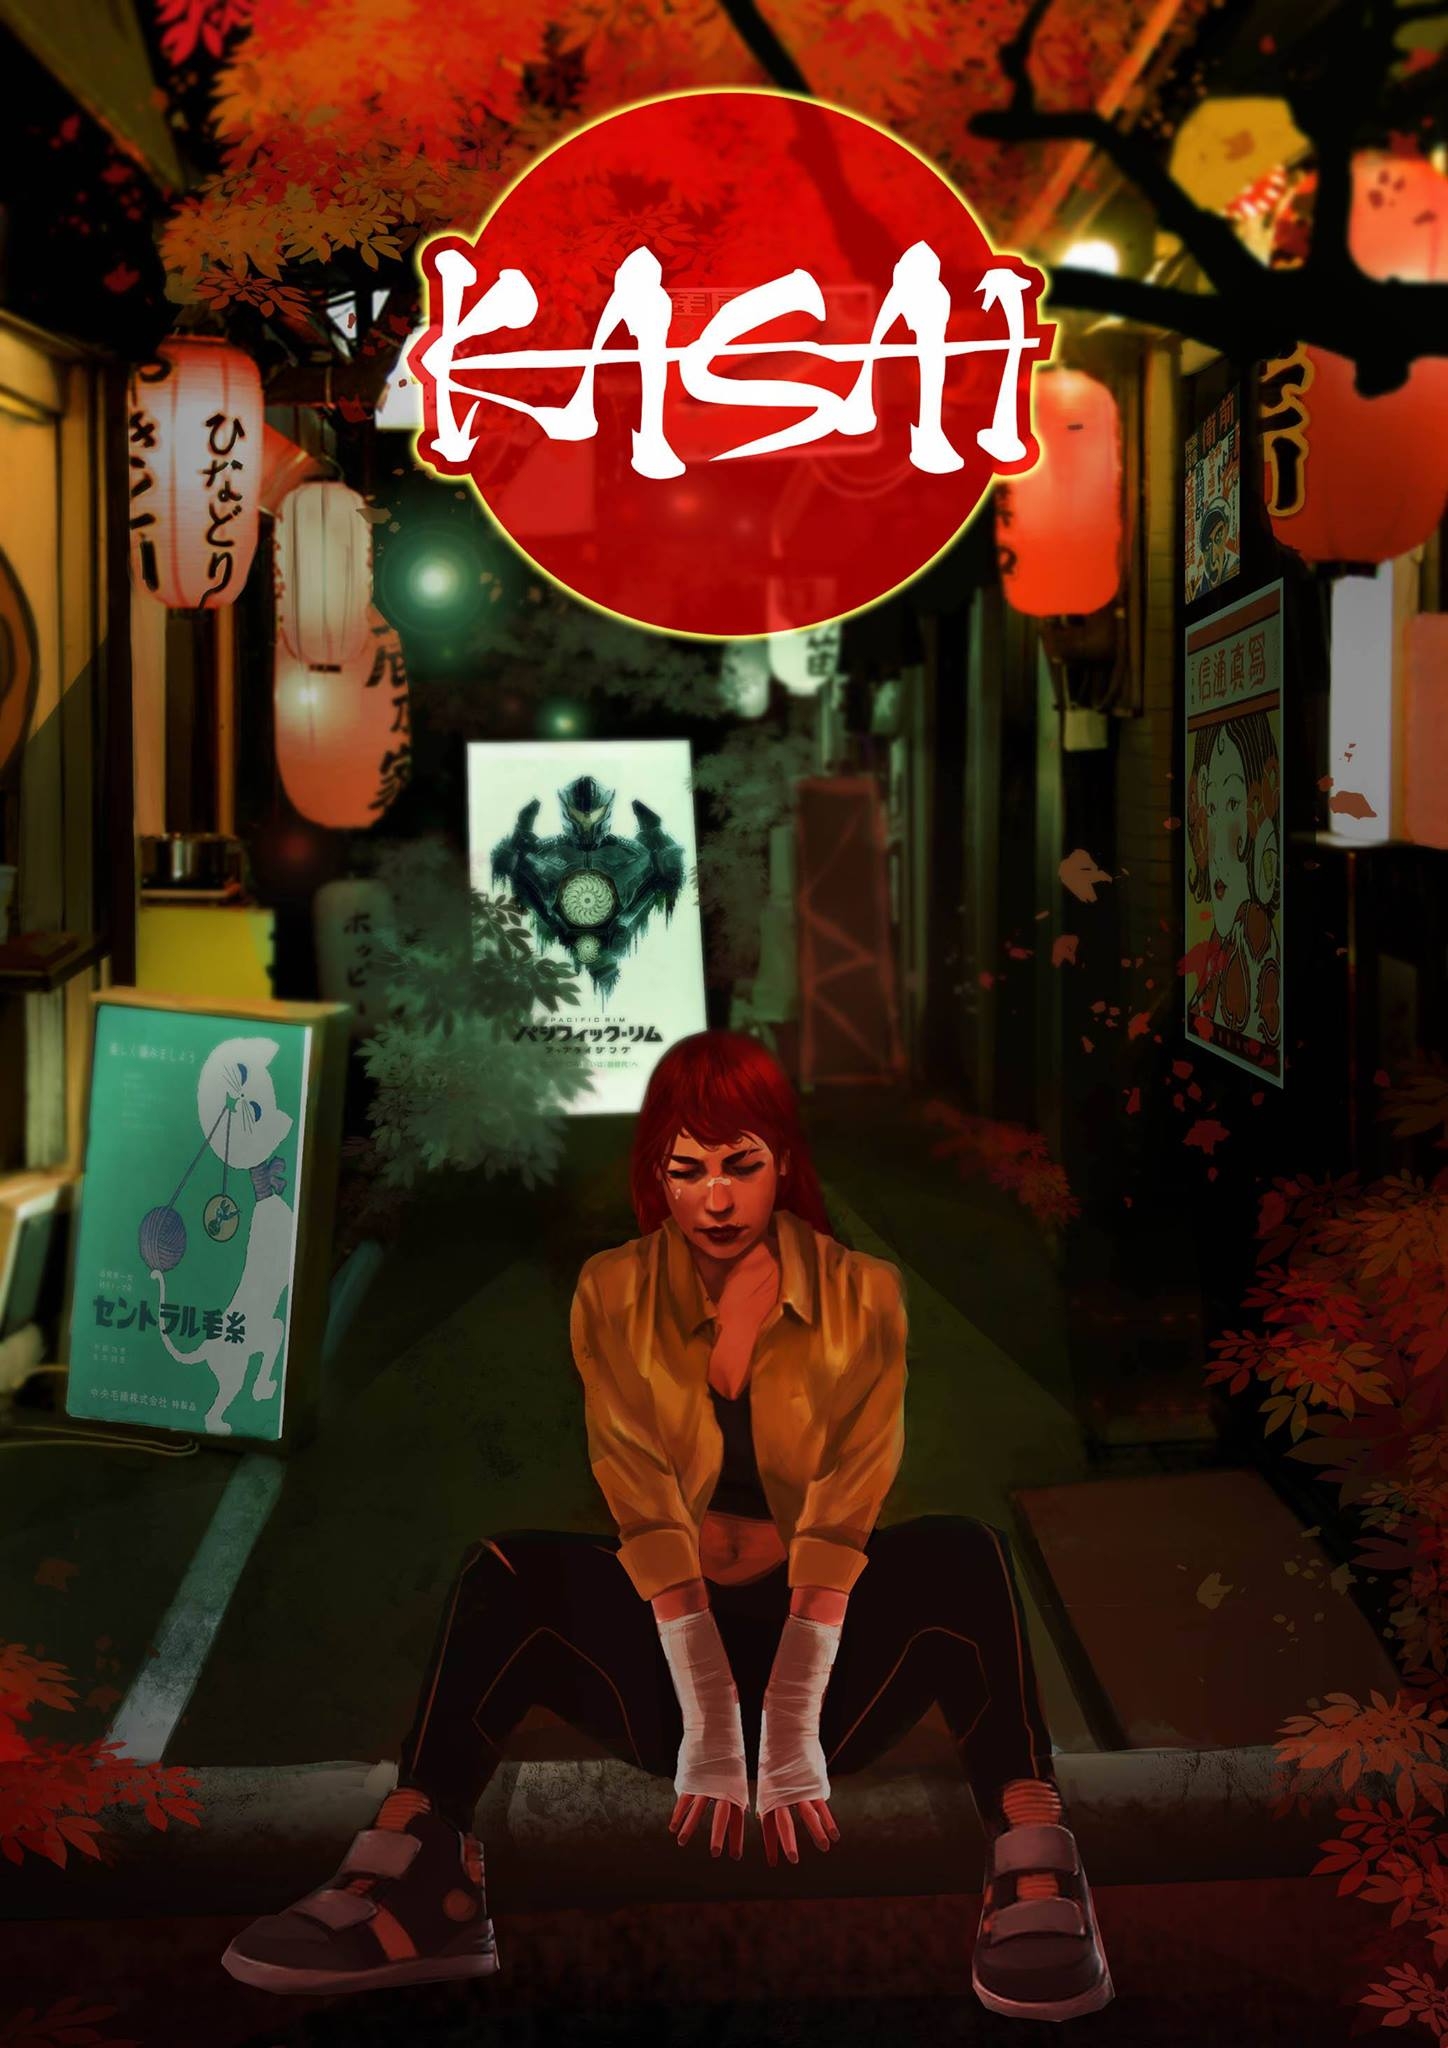 A sneak peek at another variant cover of Kasai